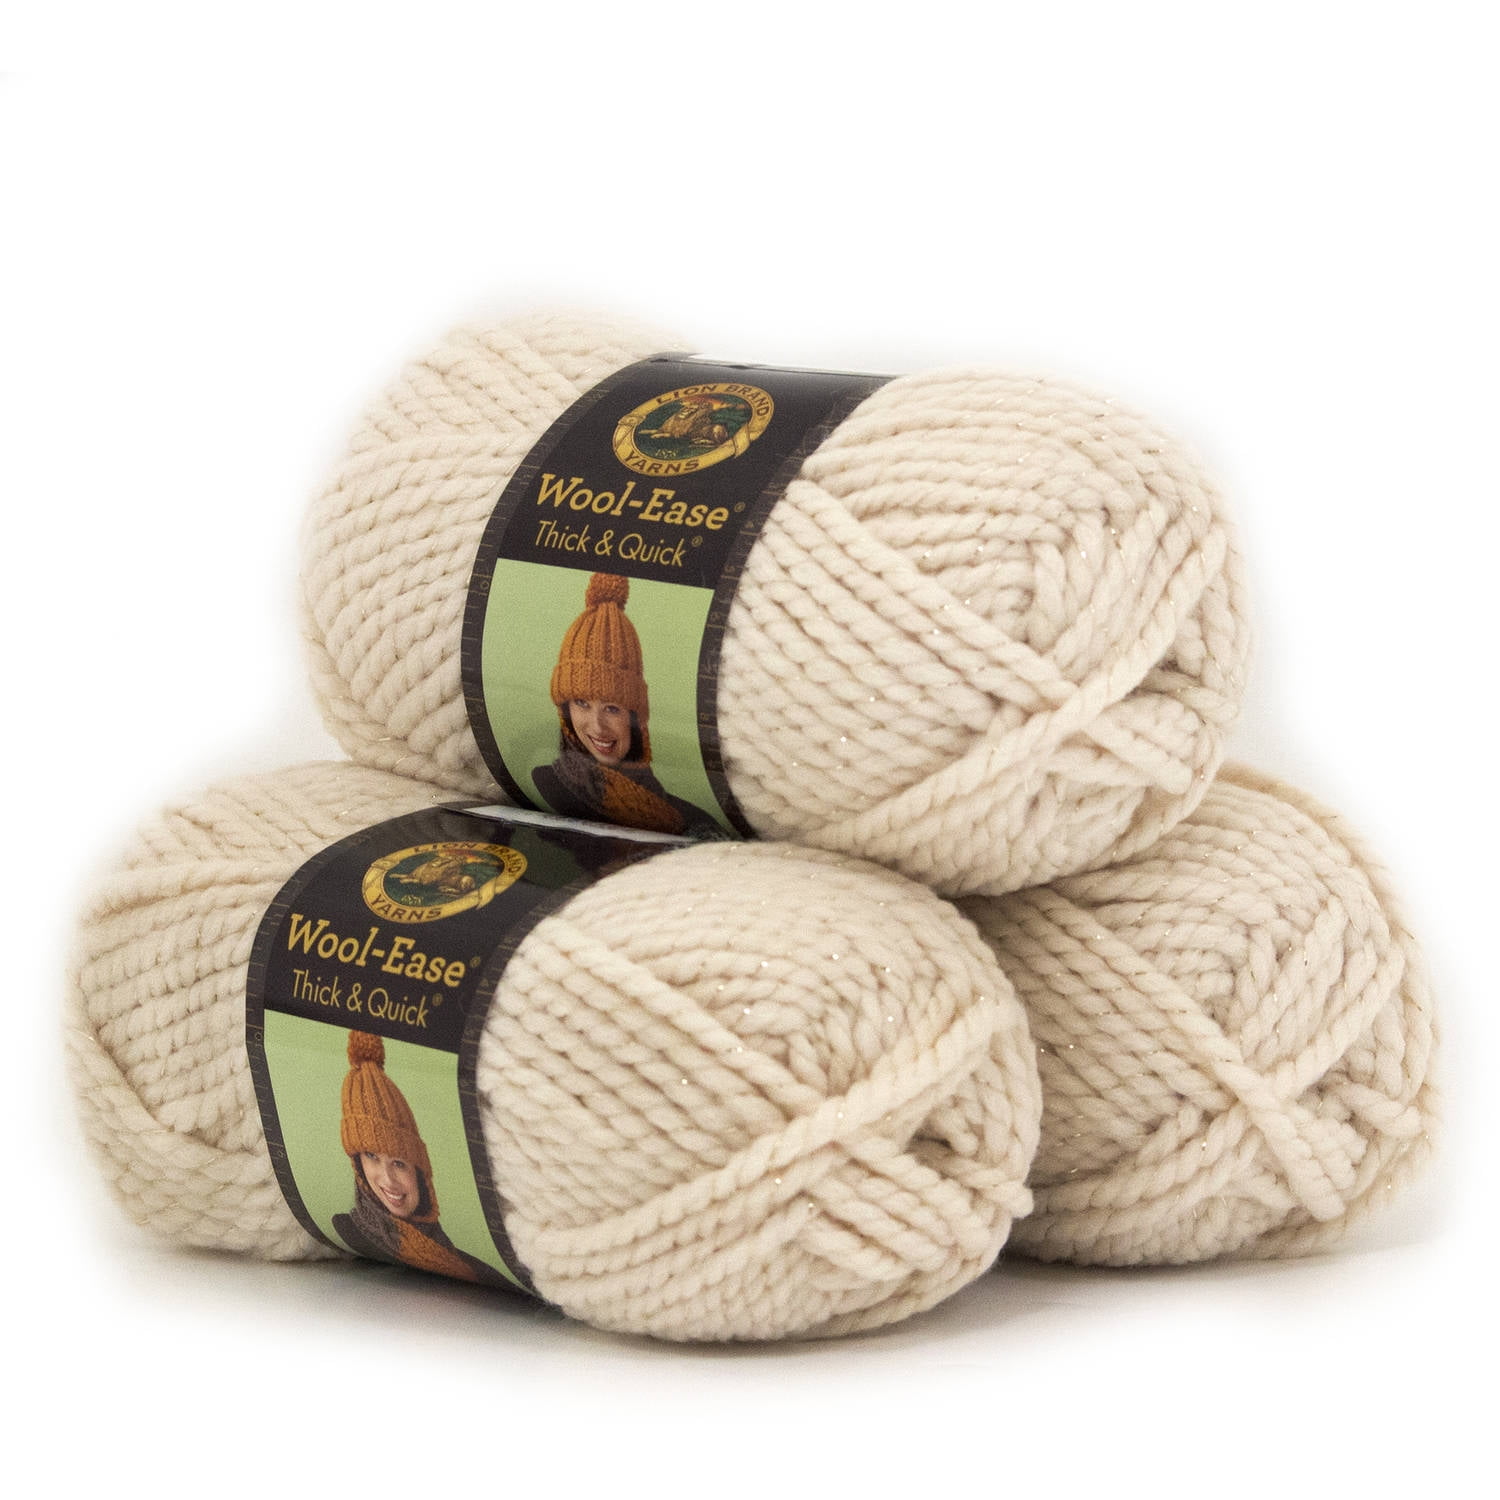 Lion Brand Yarn Wool-Ease Thick & Quick Yarn, Soft and Bulky Yarn for  Knitting, Crocheting, and Crafting, 1 Skein, Fairy